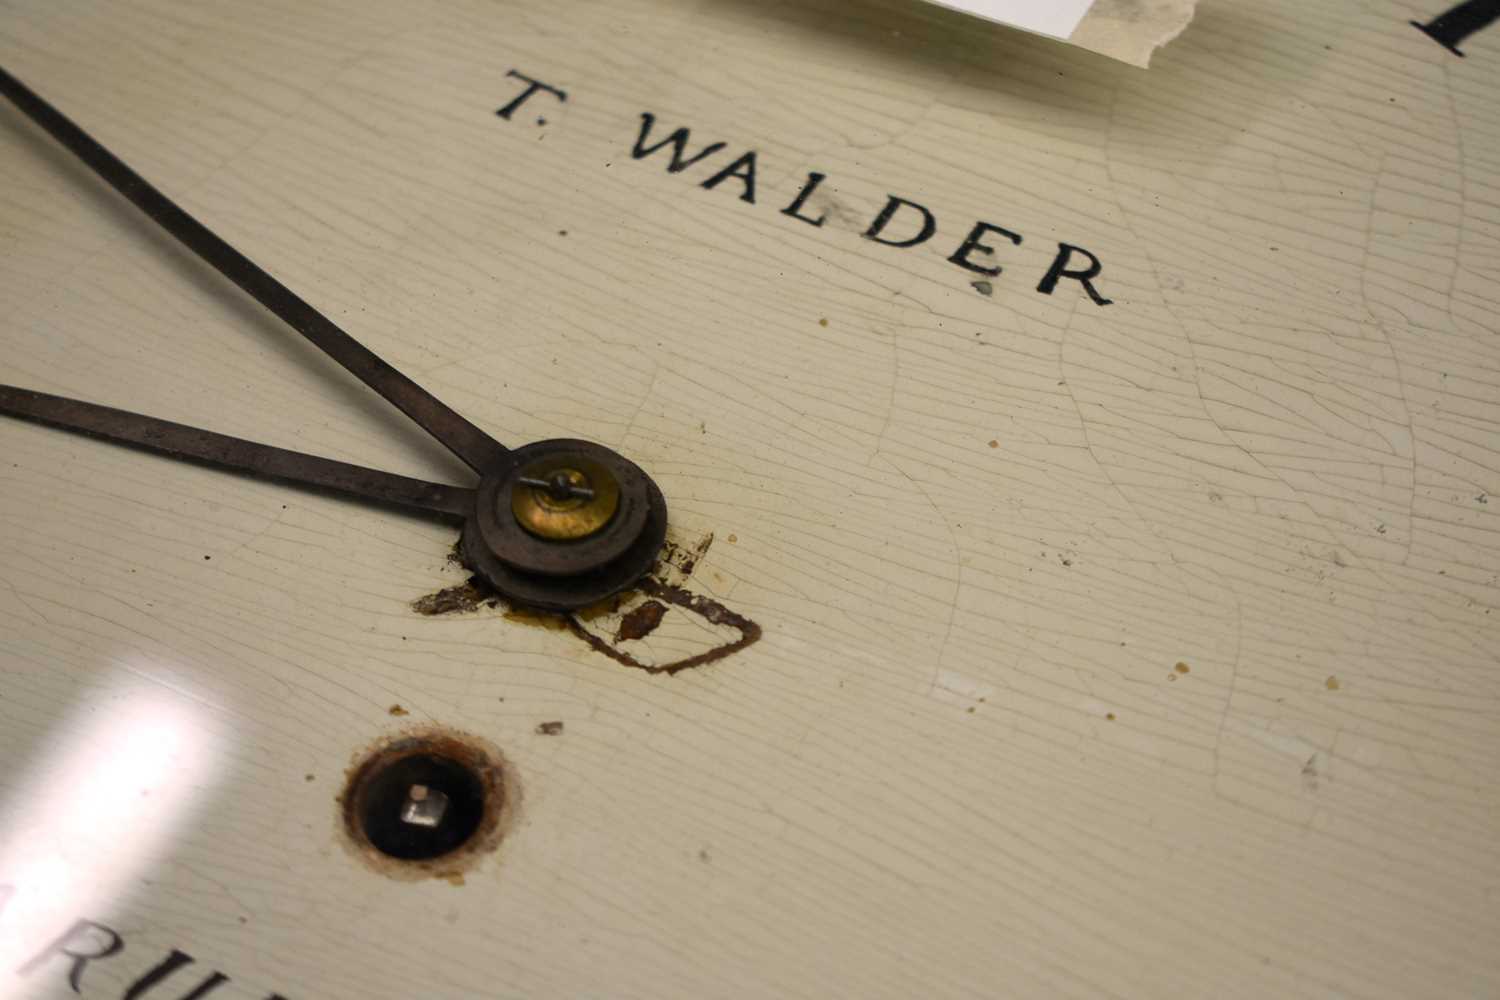 A RARE WOOD DIAL THOMAS WALDER OF ARUNDEL HANGING WALL CLOCK with black painted Roman numerals and - Image 13 of 19